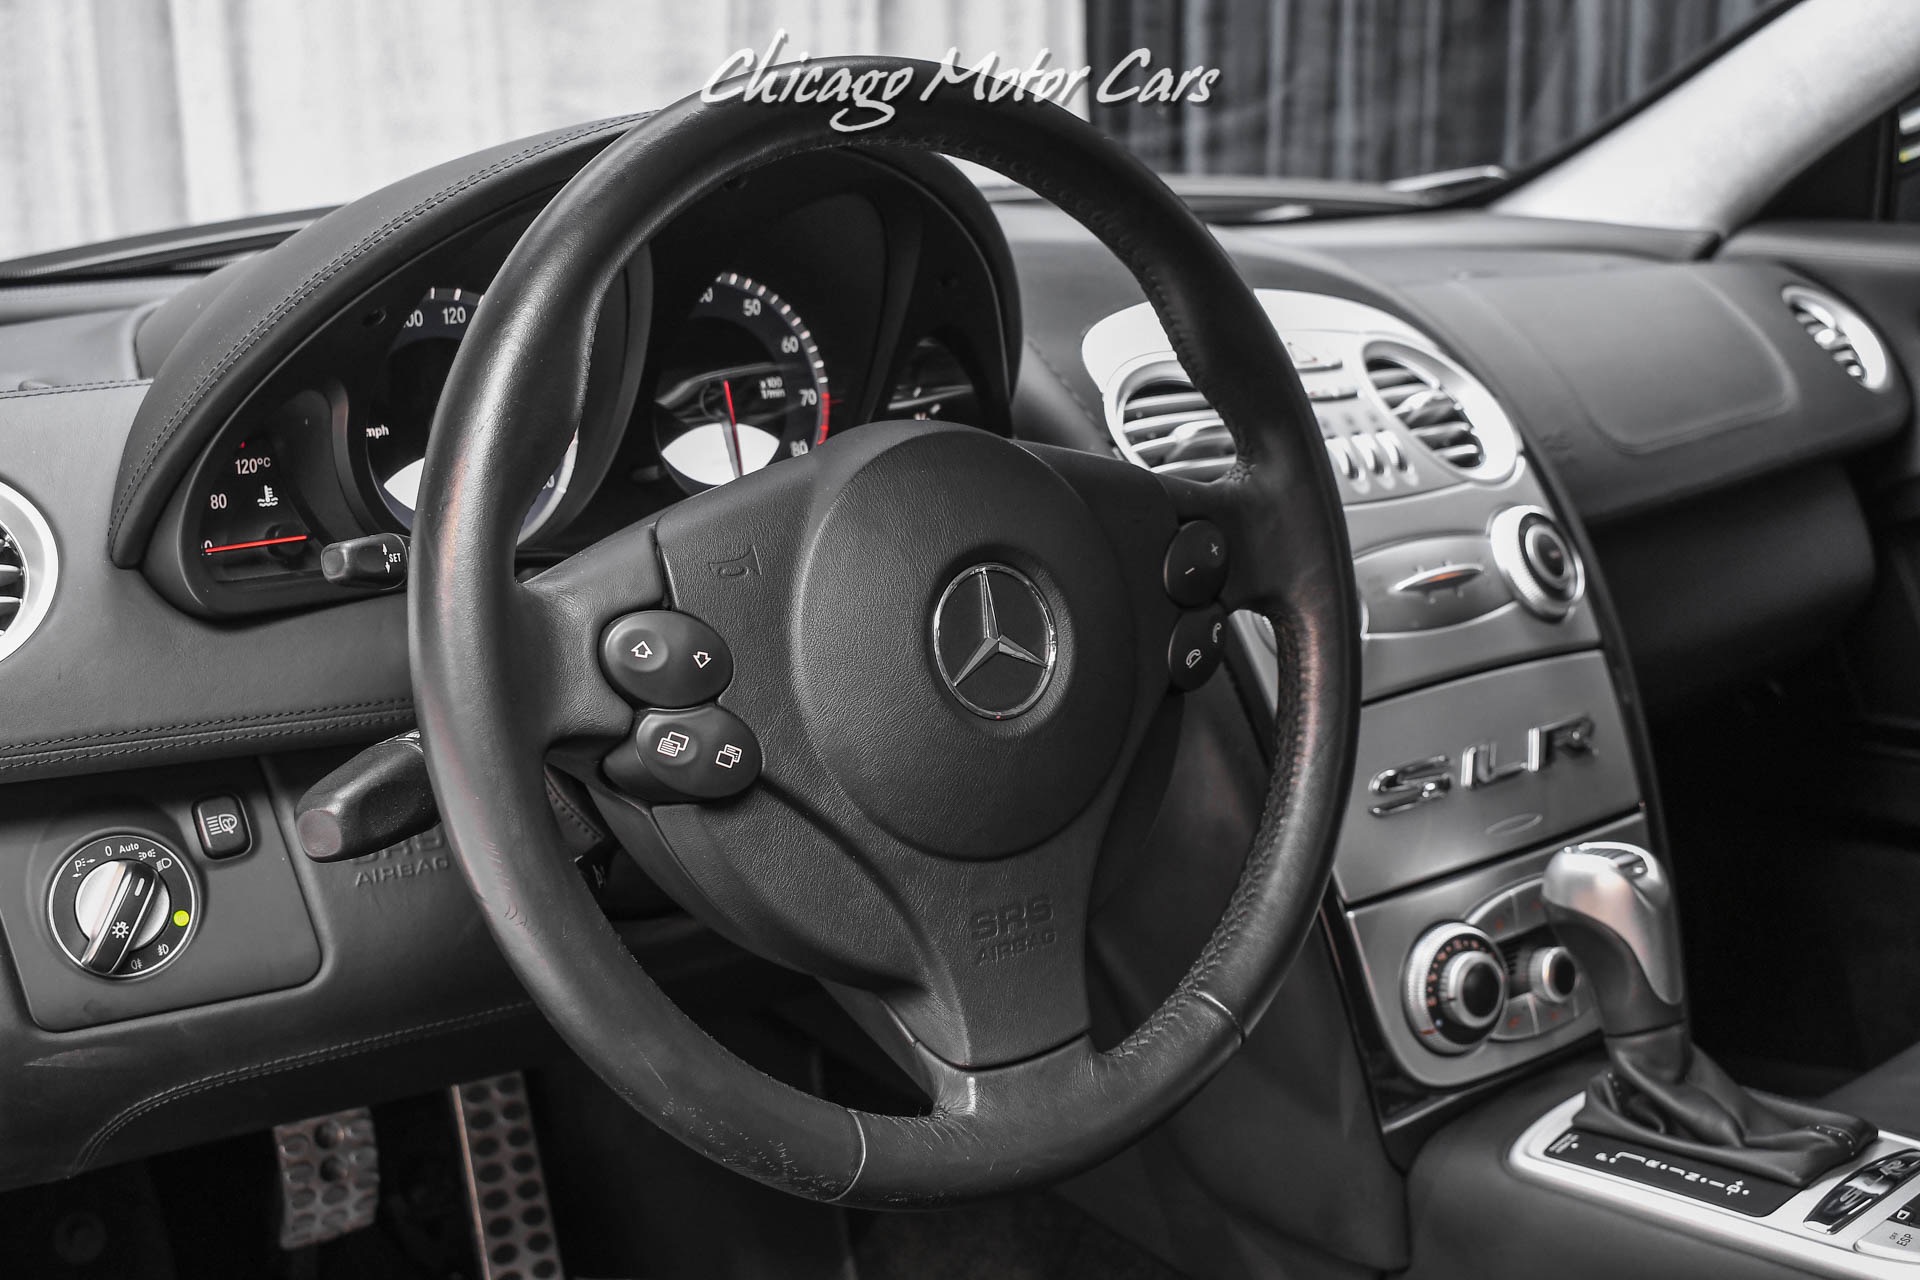 Used-2006-Mercedes-Benz-SLR-McLaren-Coupe-Crystal-Galaxite-Black-LOW-Miles-454K-MSRP-RARE